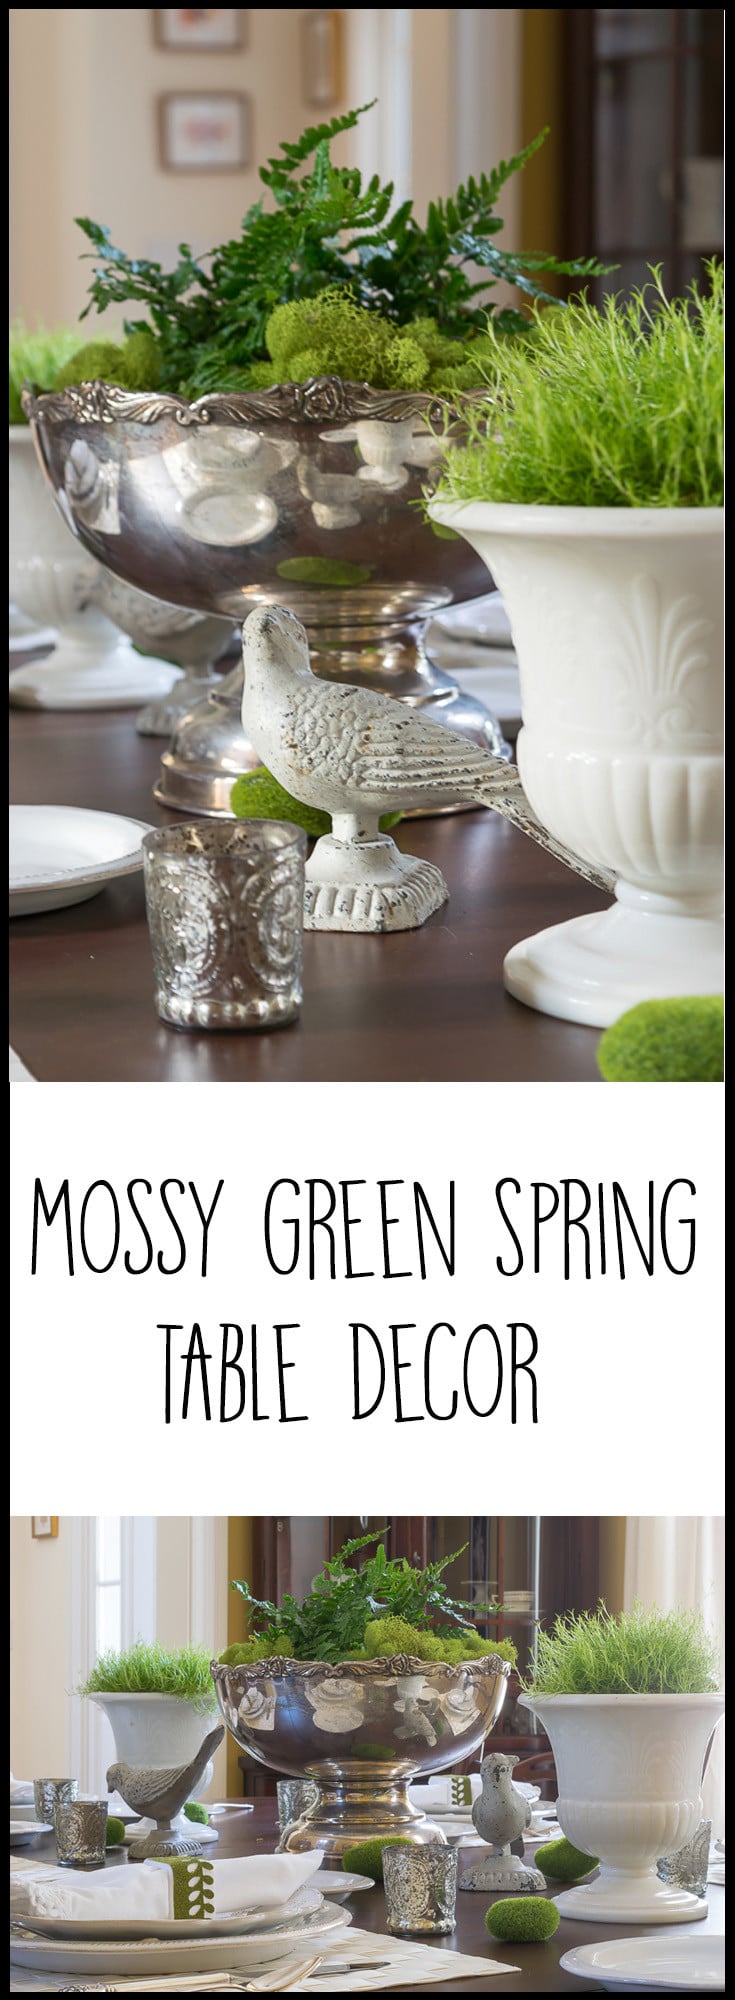 I'm loving all things greenery and mossy in my home decor. Great ideas for using these colors and textures for my spring table decor.